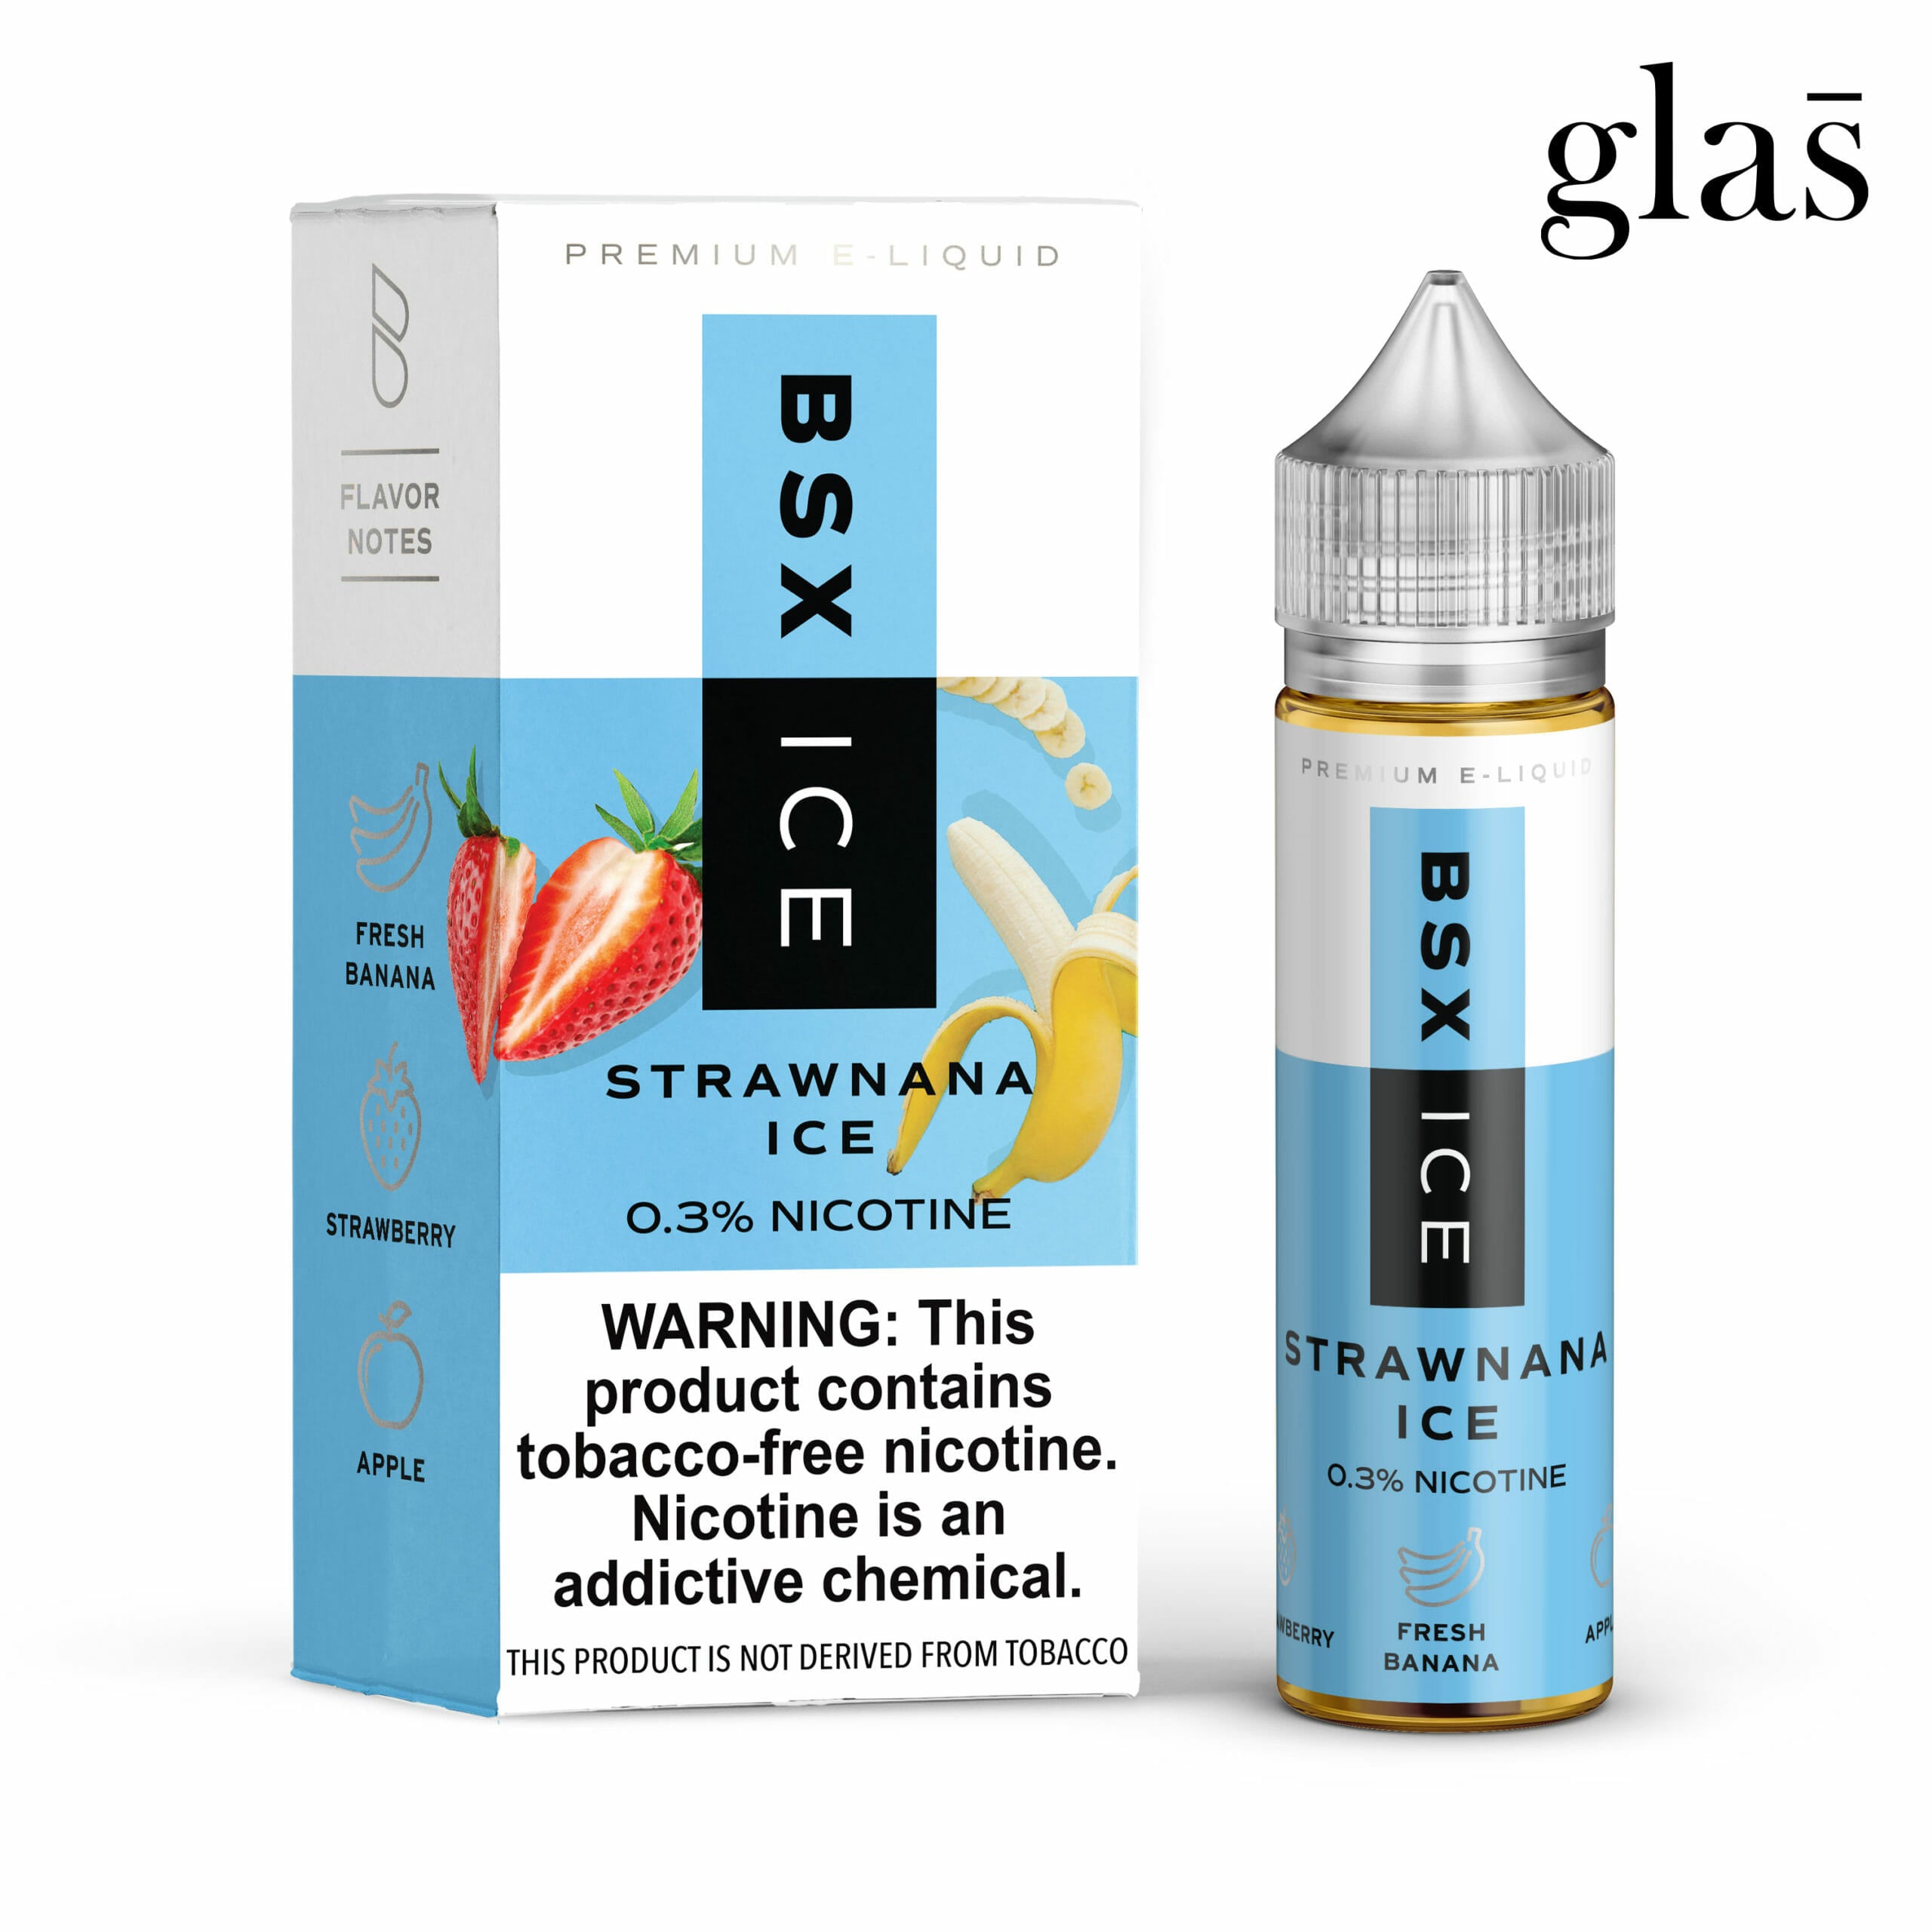 Strawnana Ice by GLAS BSX Tobacco-Free Nicotine Series 60mL with Packaging